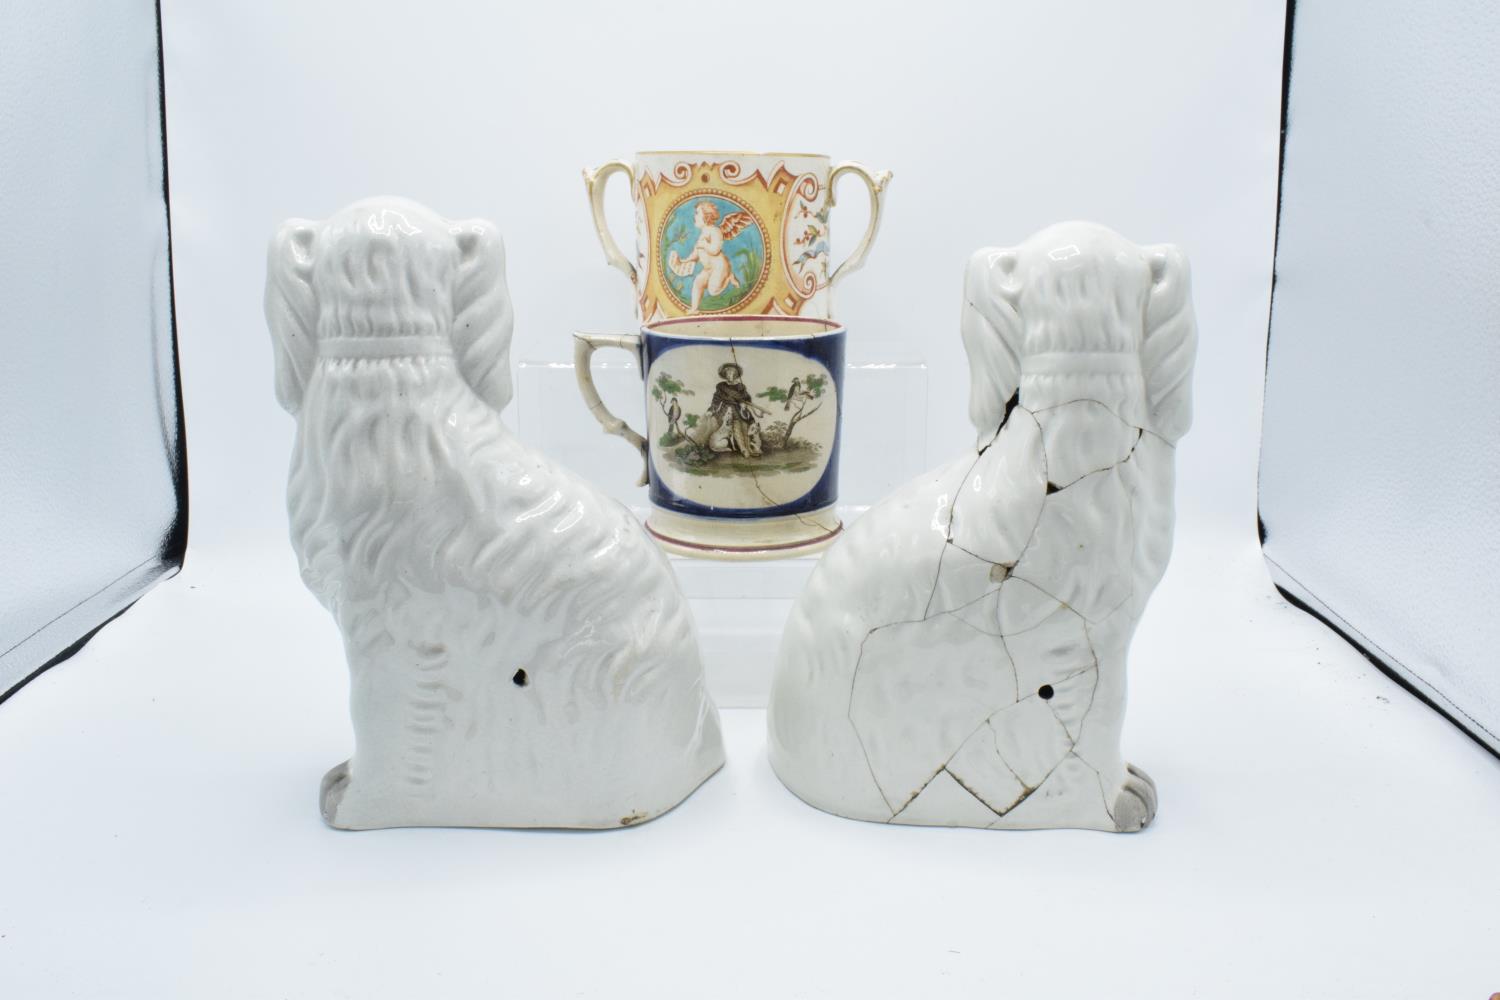 19th century Staffordshire pottery to include a pair of dogs, a shepherd mug and a 2 handled - Image 3 of 3